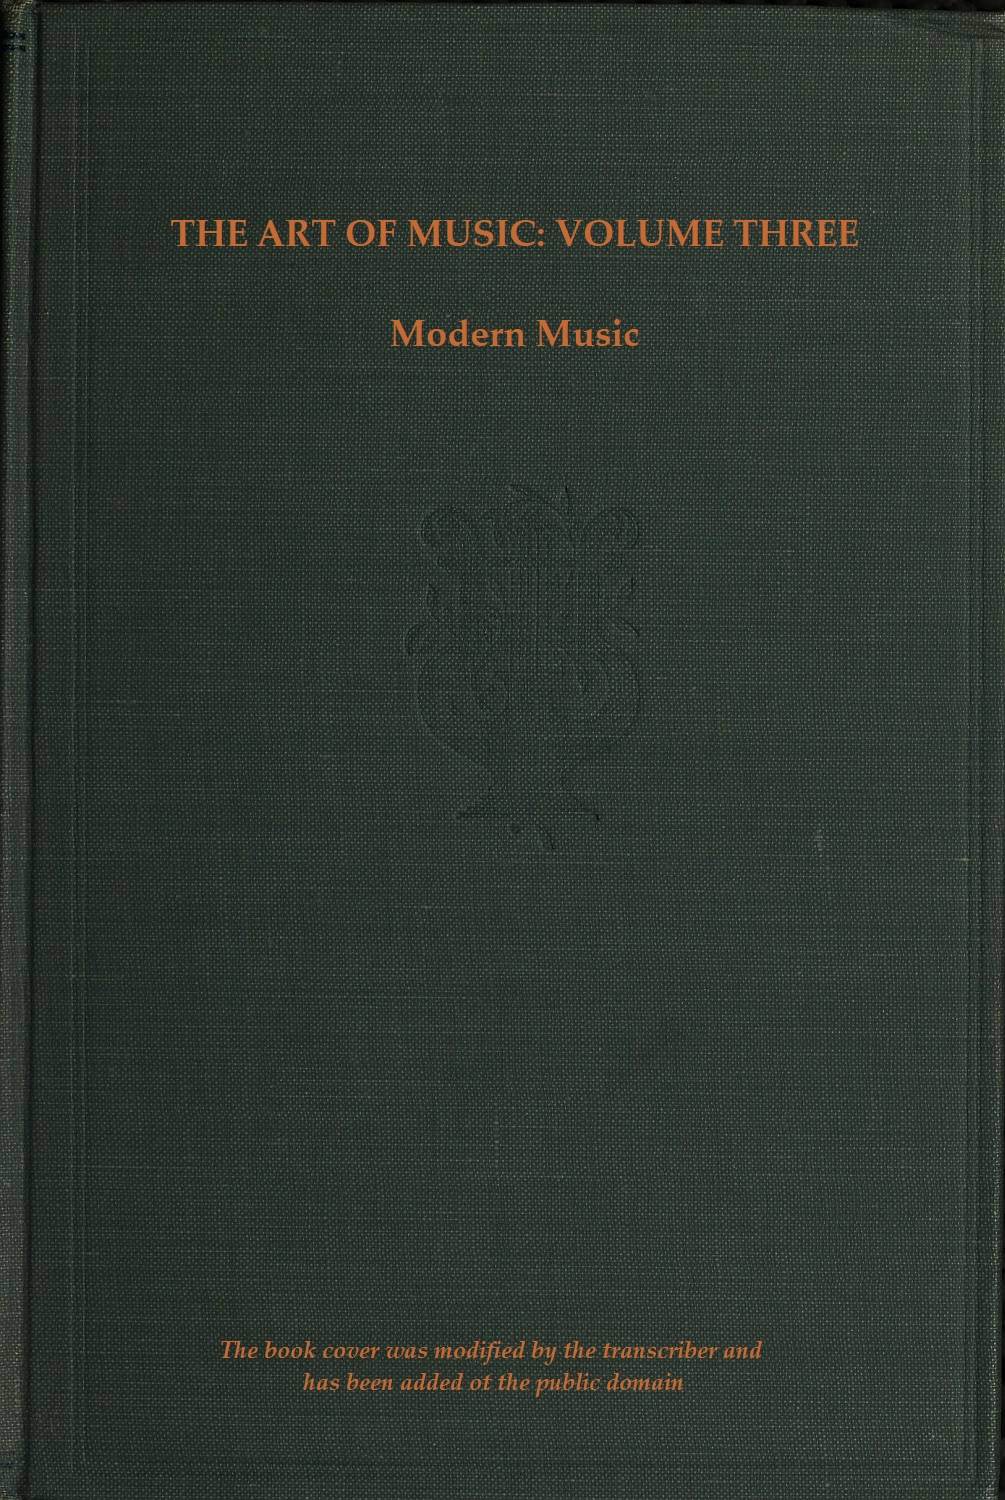 The Art of Music, by Daniel Gregory Mason—A Project Gutenberg eBook